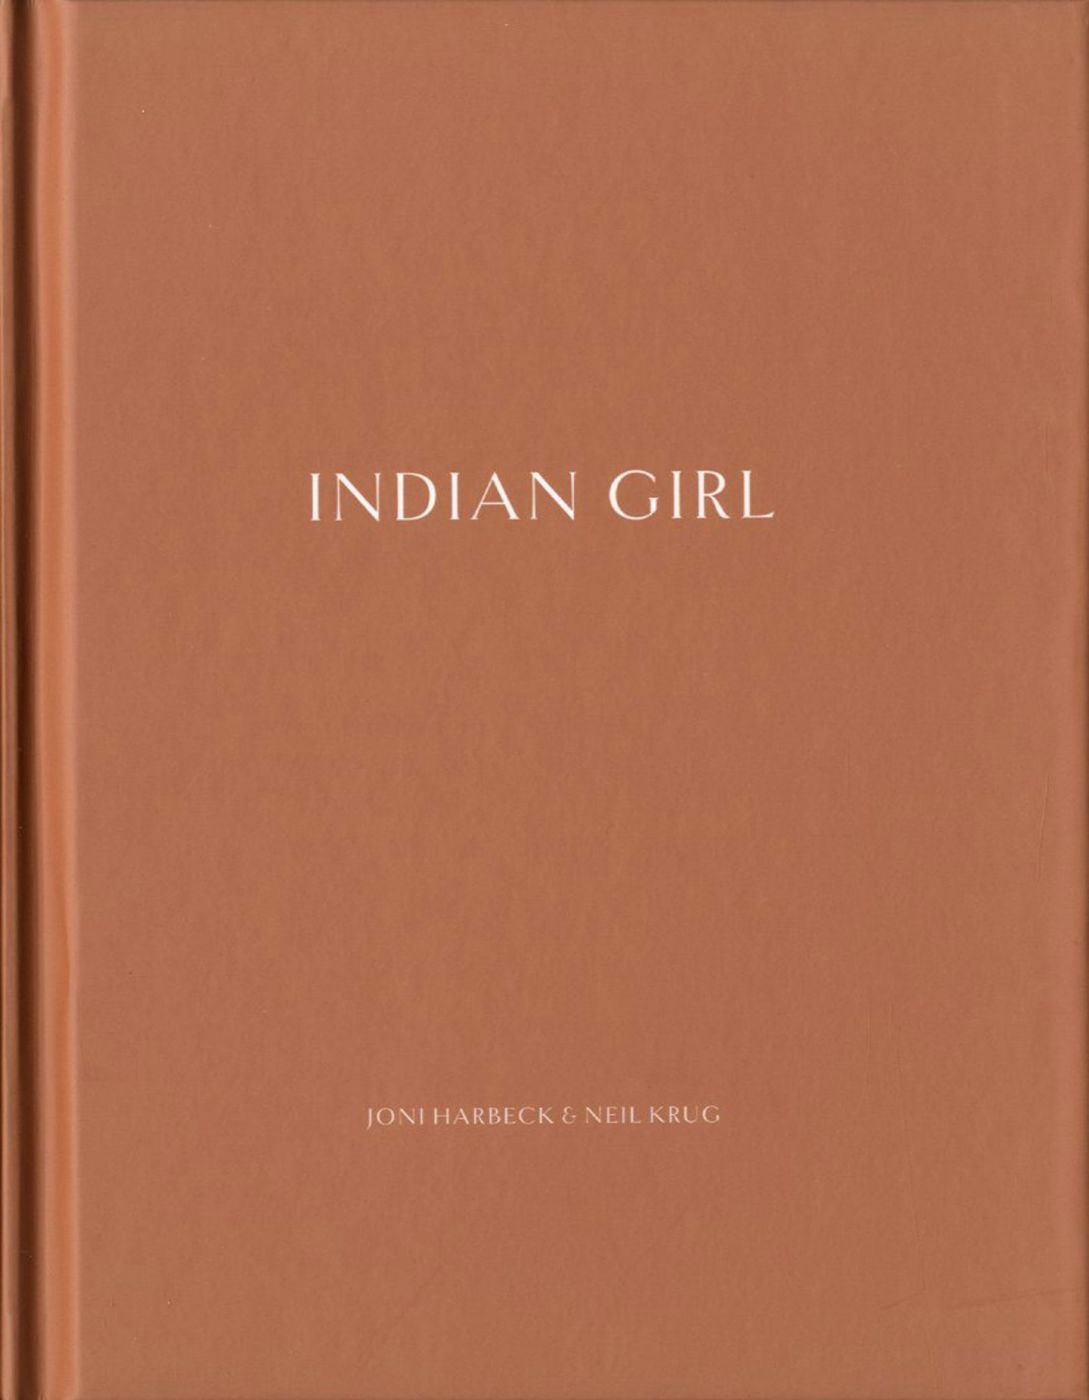 Joni Harbeck & Neil Krug: Indian Girl (One Picture Book #70), Limited Edition (with Print)